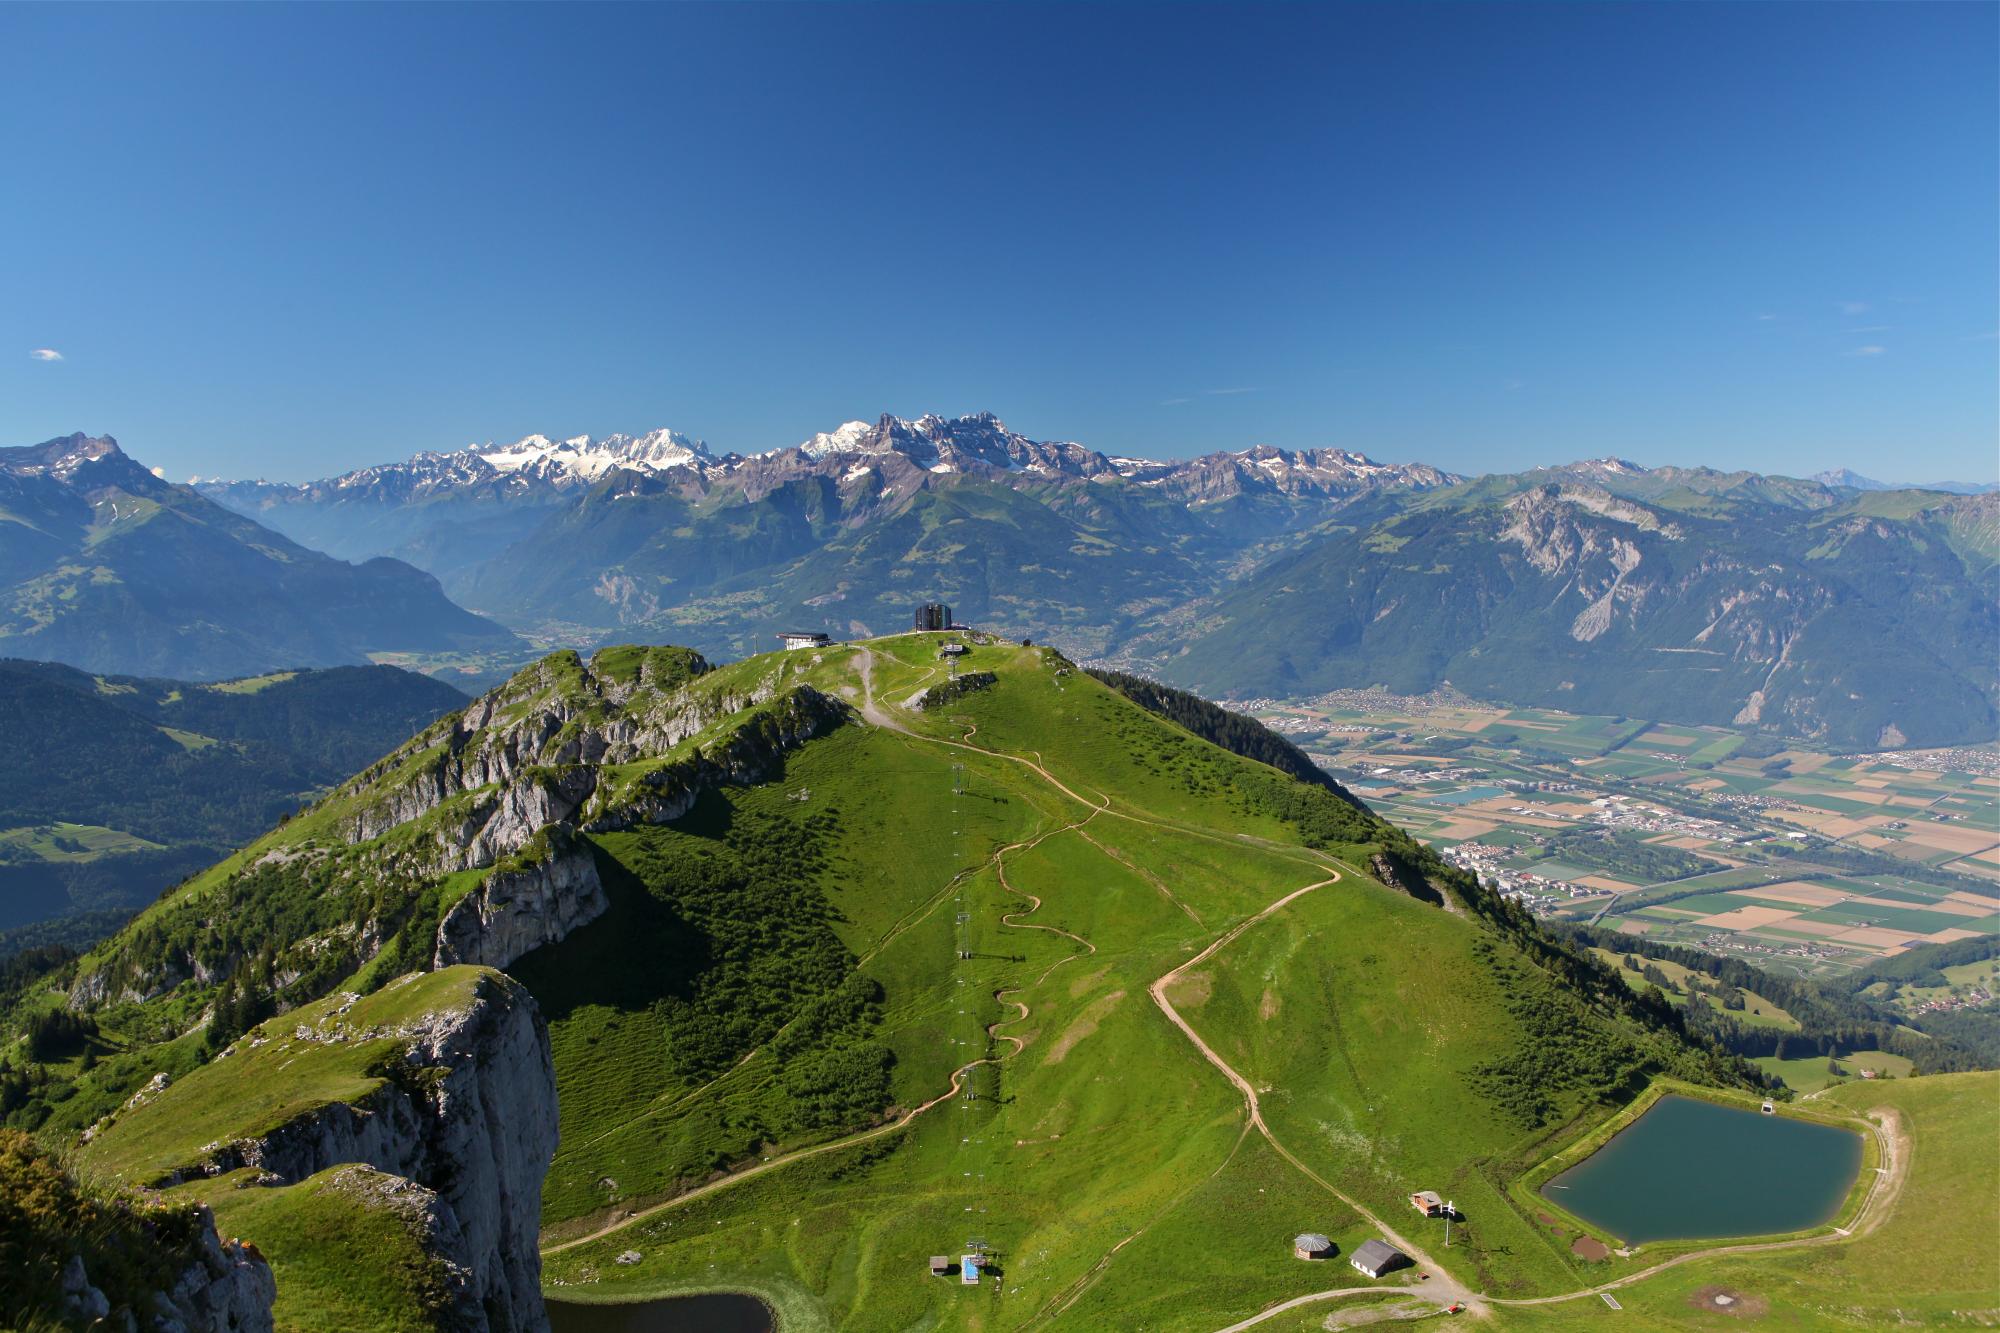 The Kuklos and the Berneuse with view over the plain and the mountains - summer - Leysin